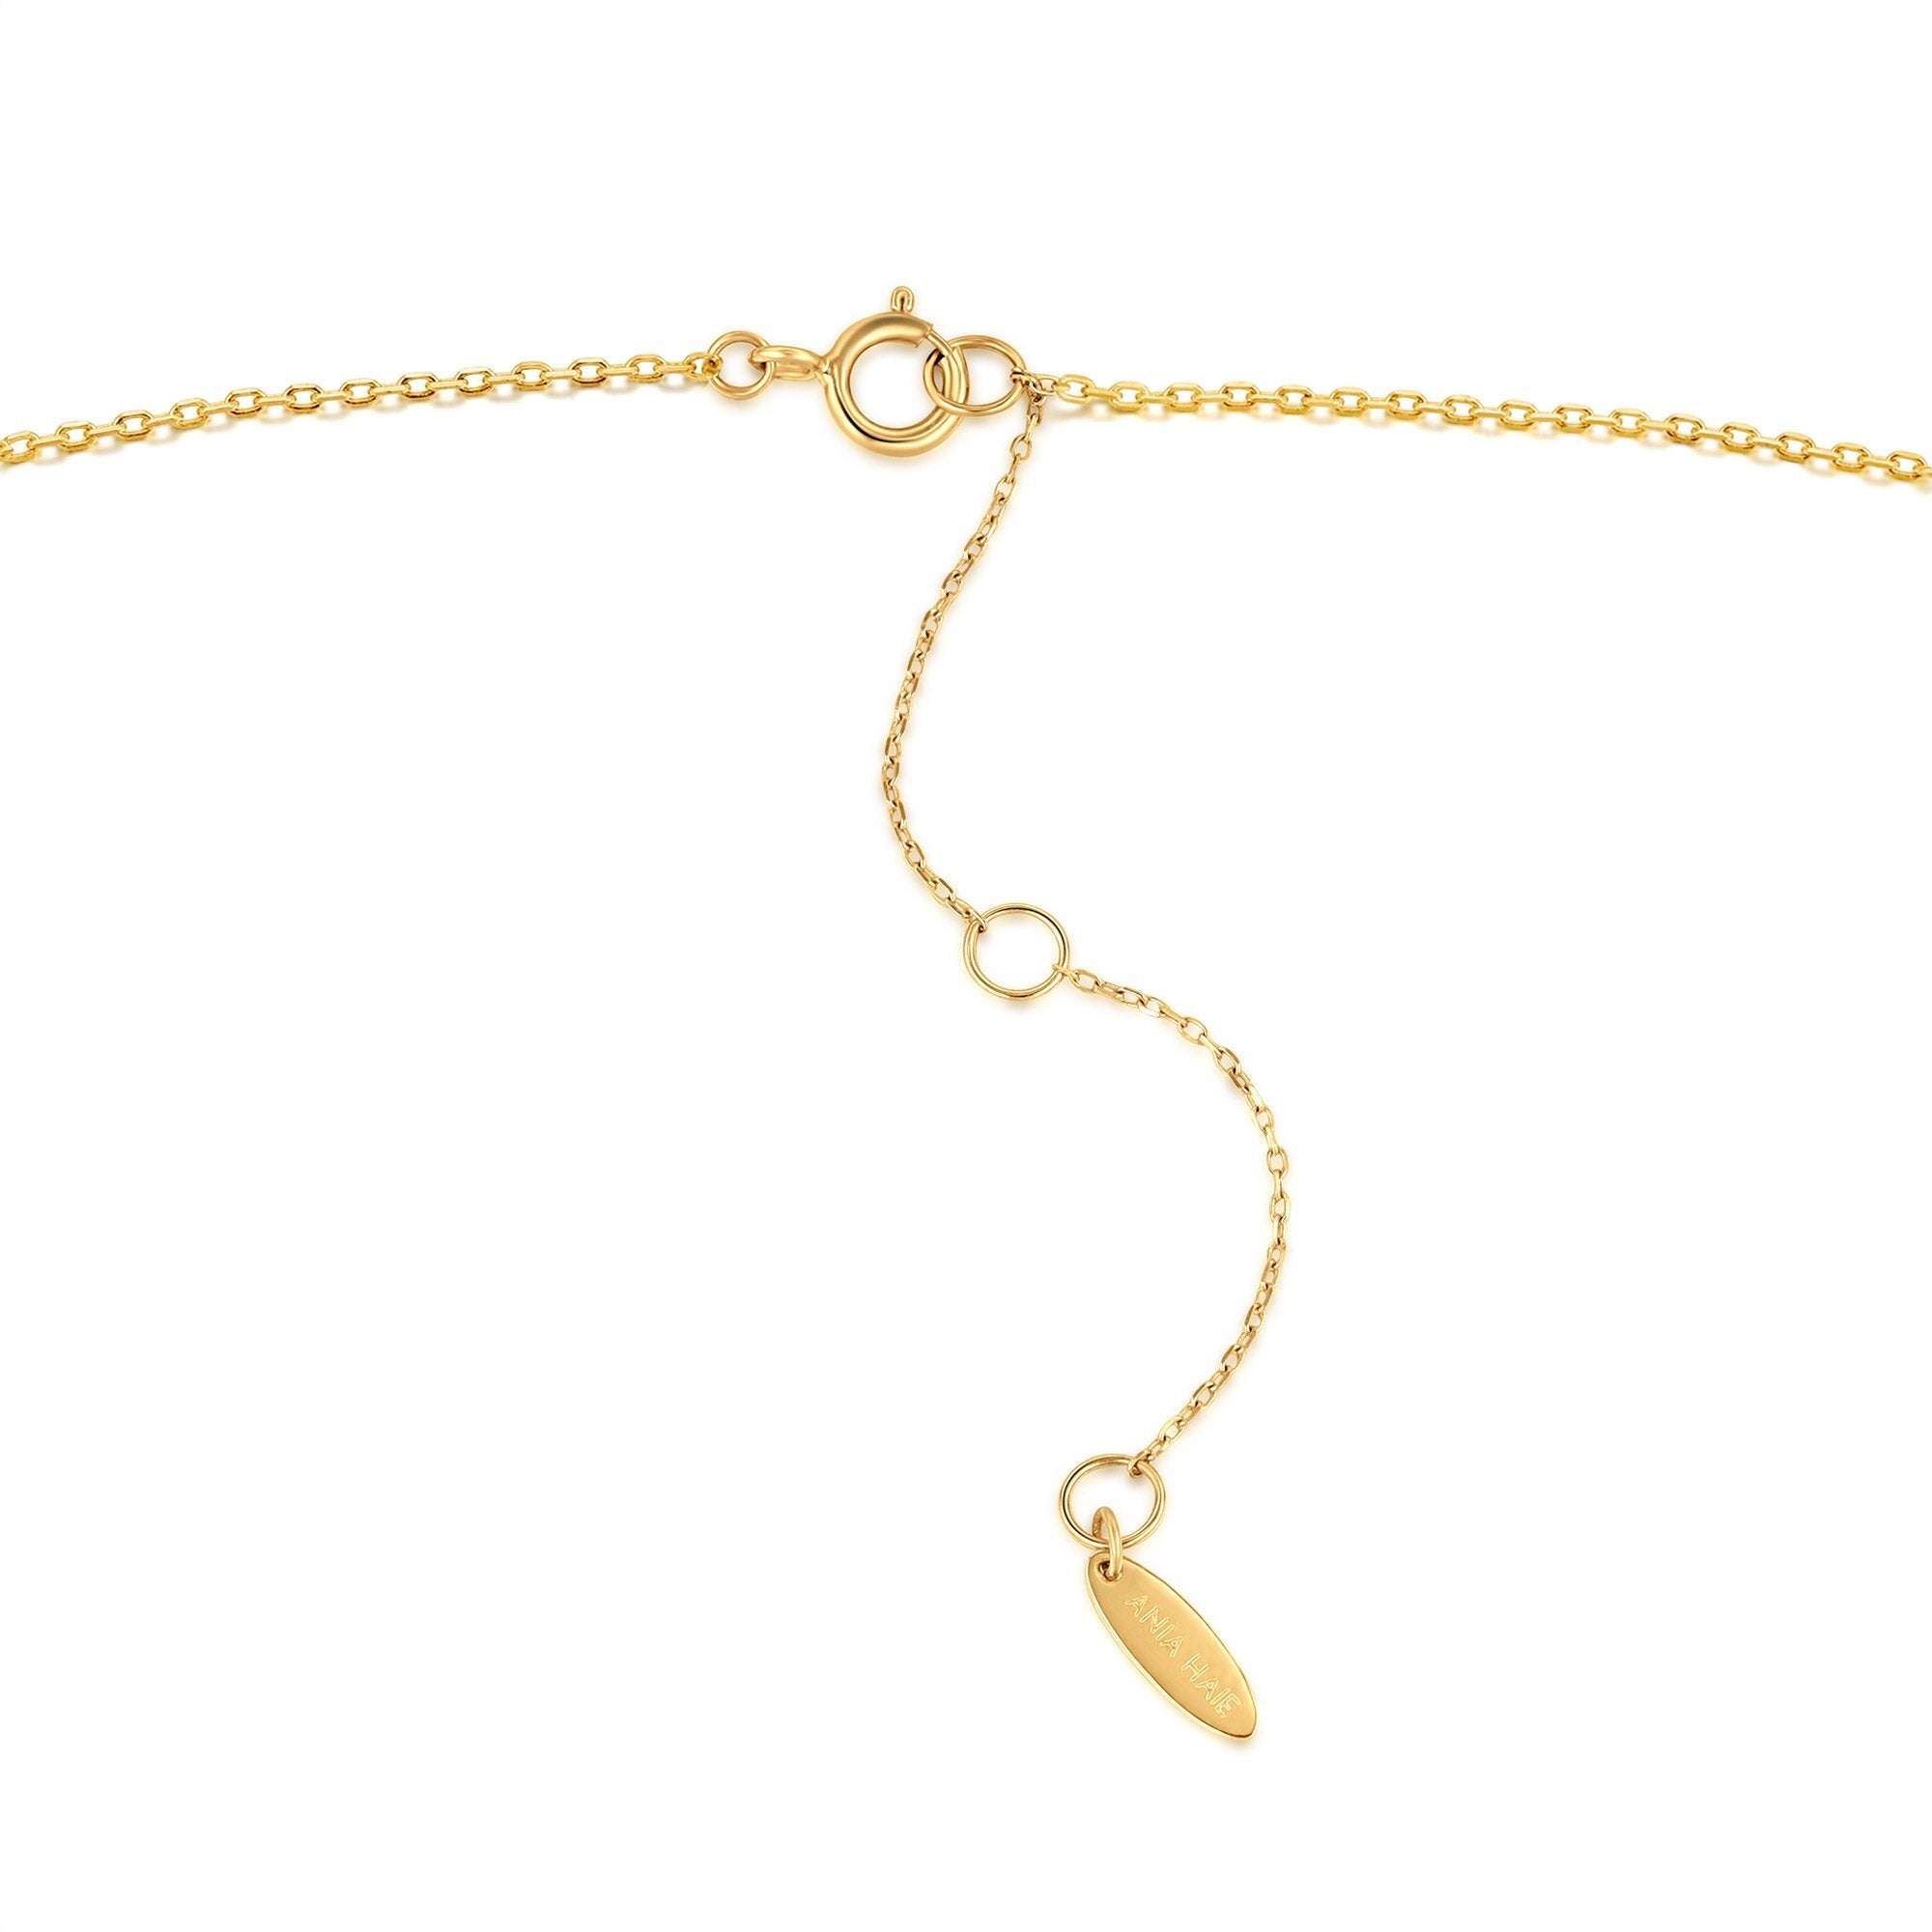 Ania Haie 14ct Gold Solid Bar Necklace